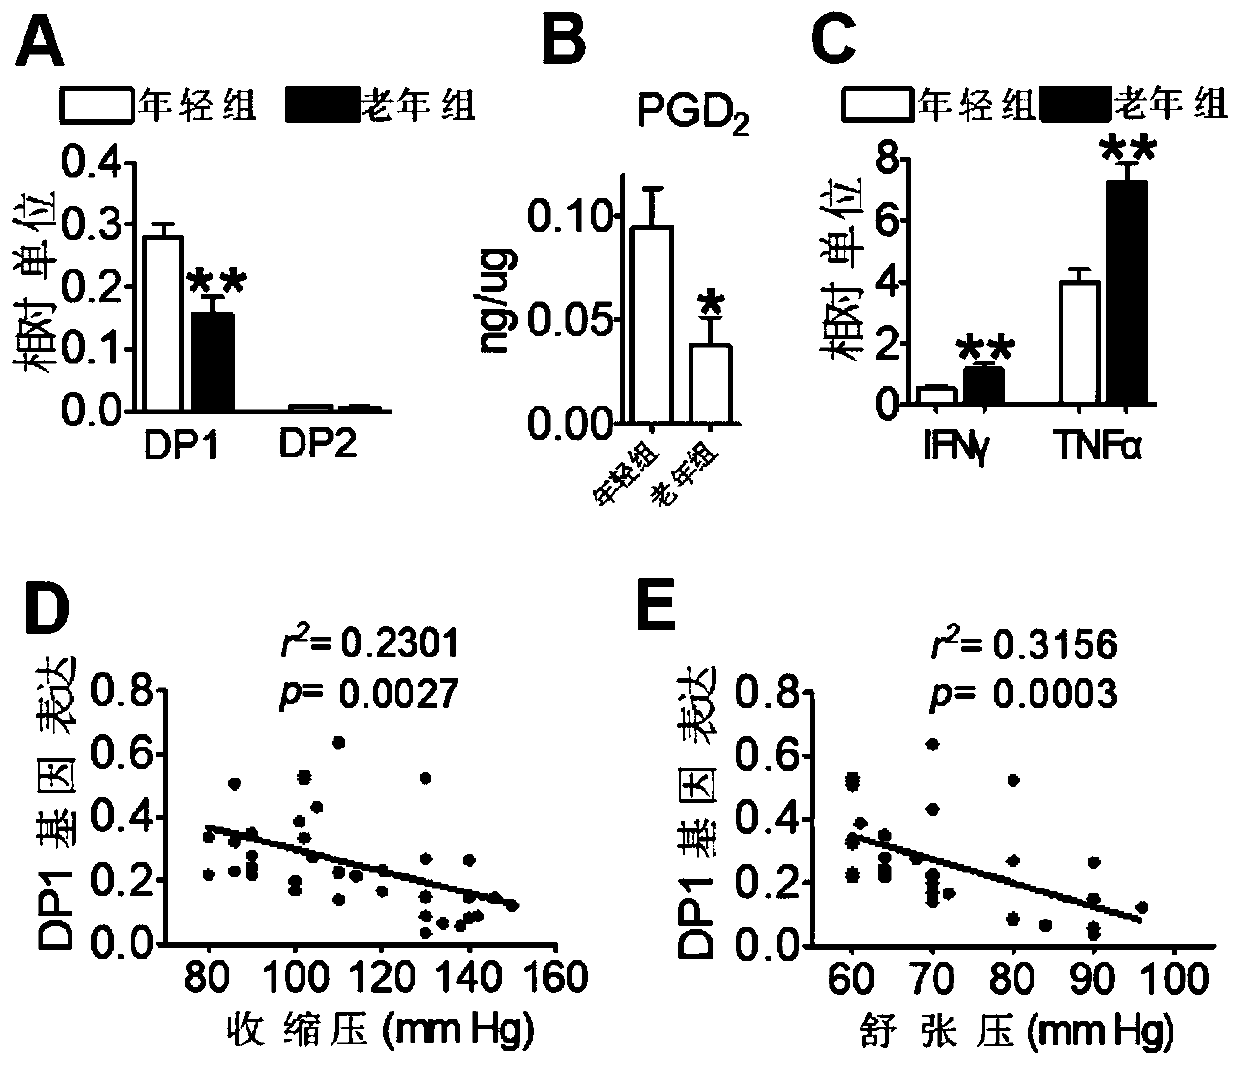 DP1 used as senile hypertension immunotherapy drug target and application of DP1